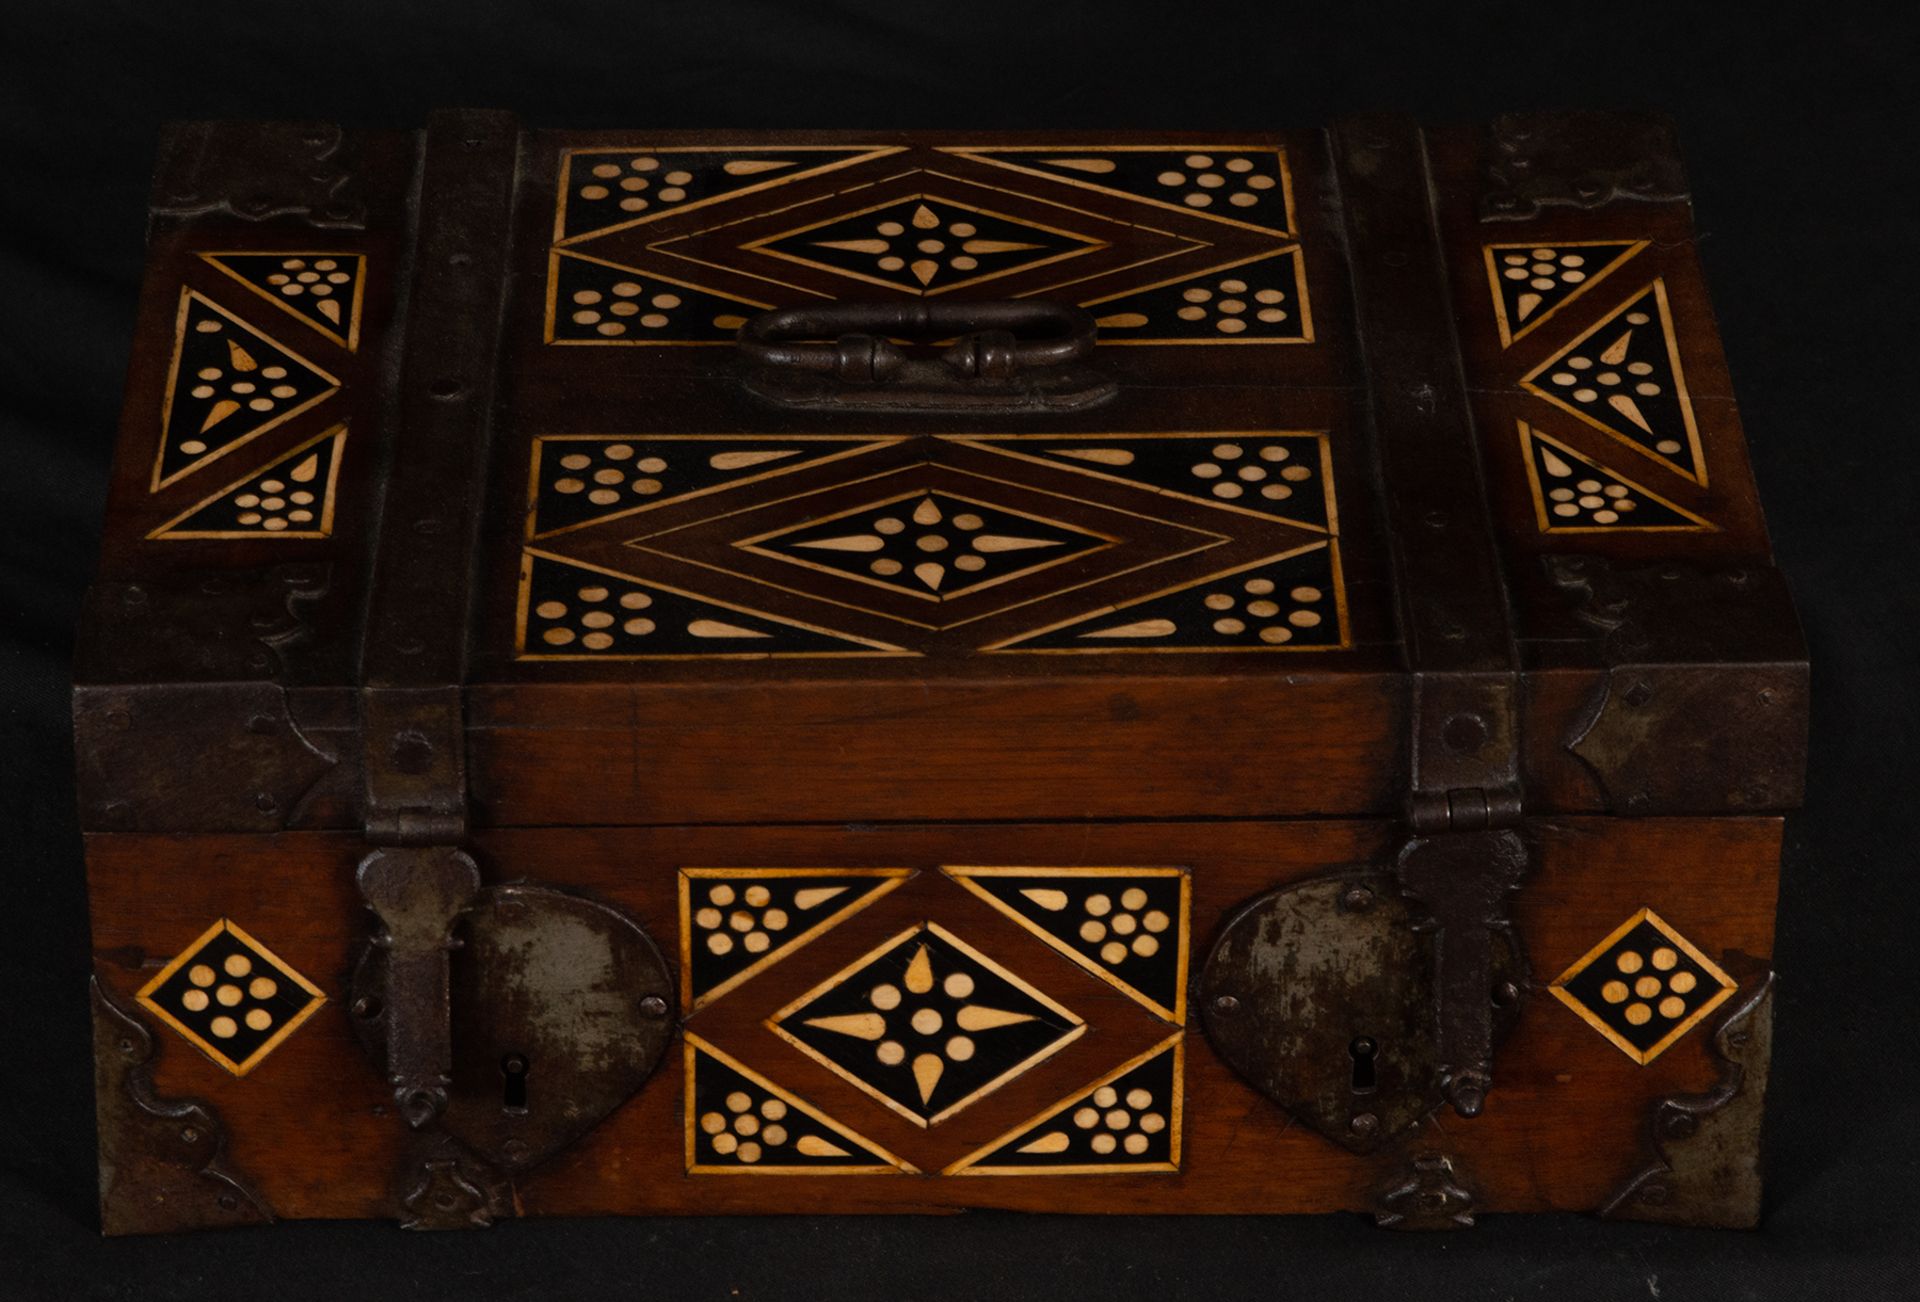 Document Holder or English Colonial Ship's Chest, South India, 18th century